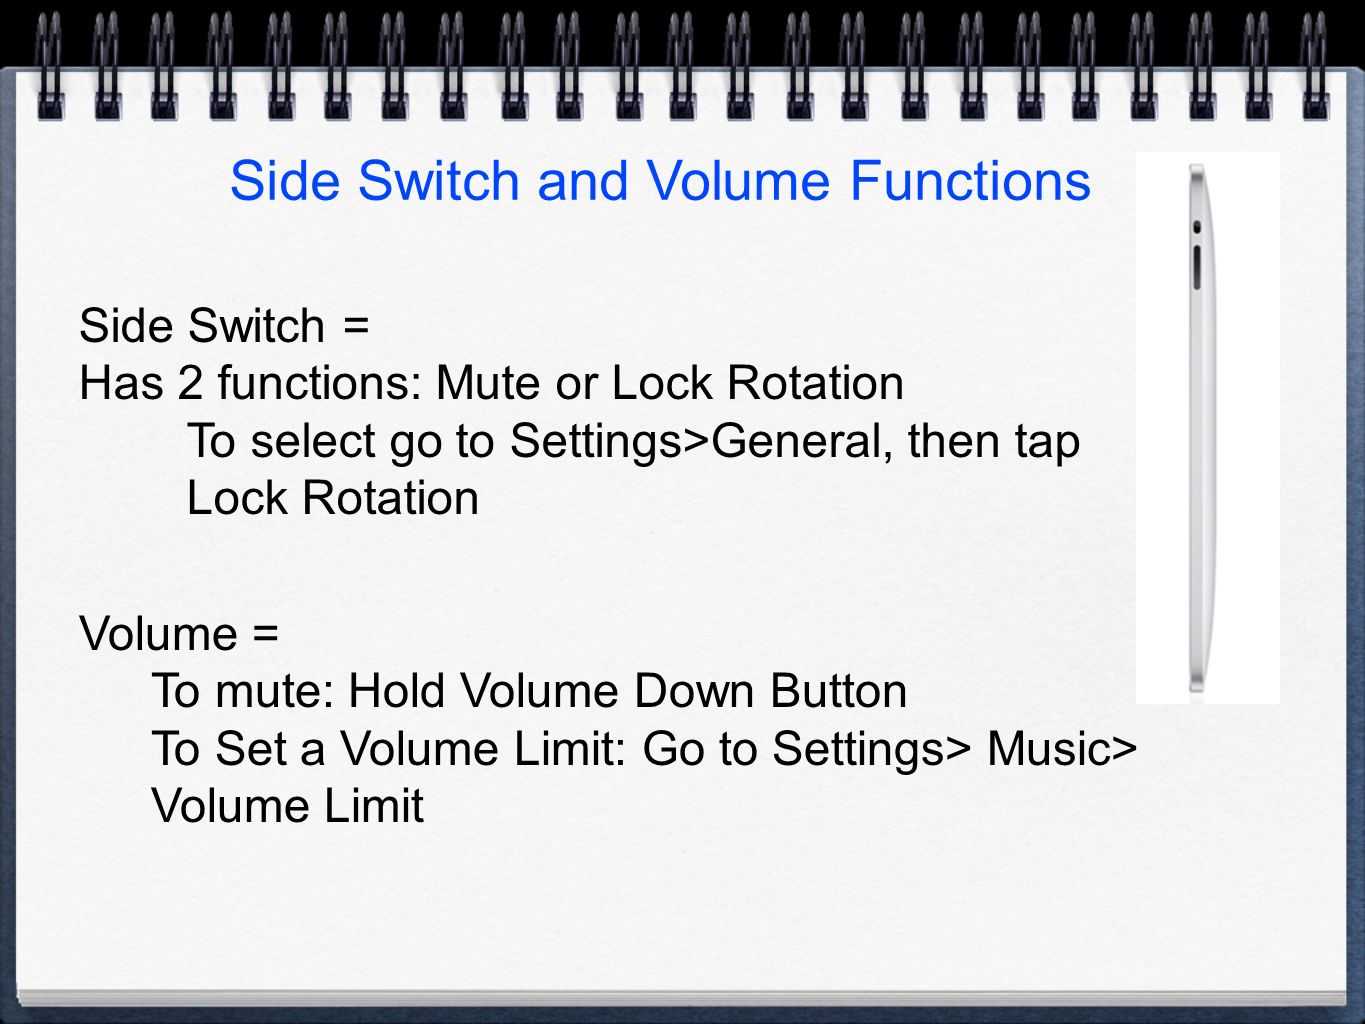 Side Switch and Volume Functions Side Switch = Has 2 functions: Mute or Lock Rotation To select go to Settings>General, then tap Lock Rotation Volume = To mute: Hold Volume Down Button To Set a Volume Limit: Go to Settings> Music> Volume Limit